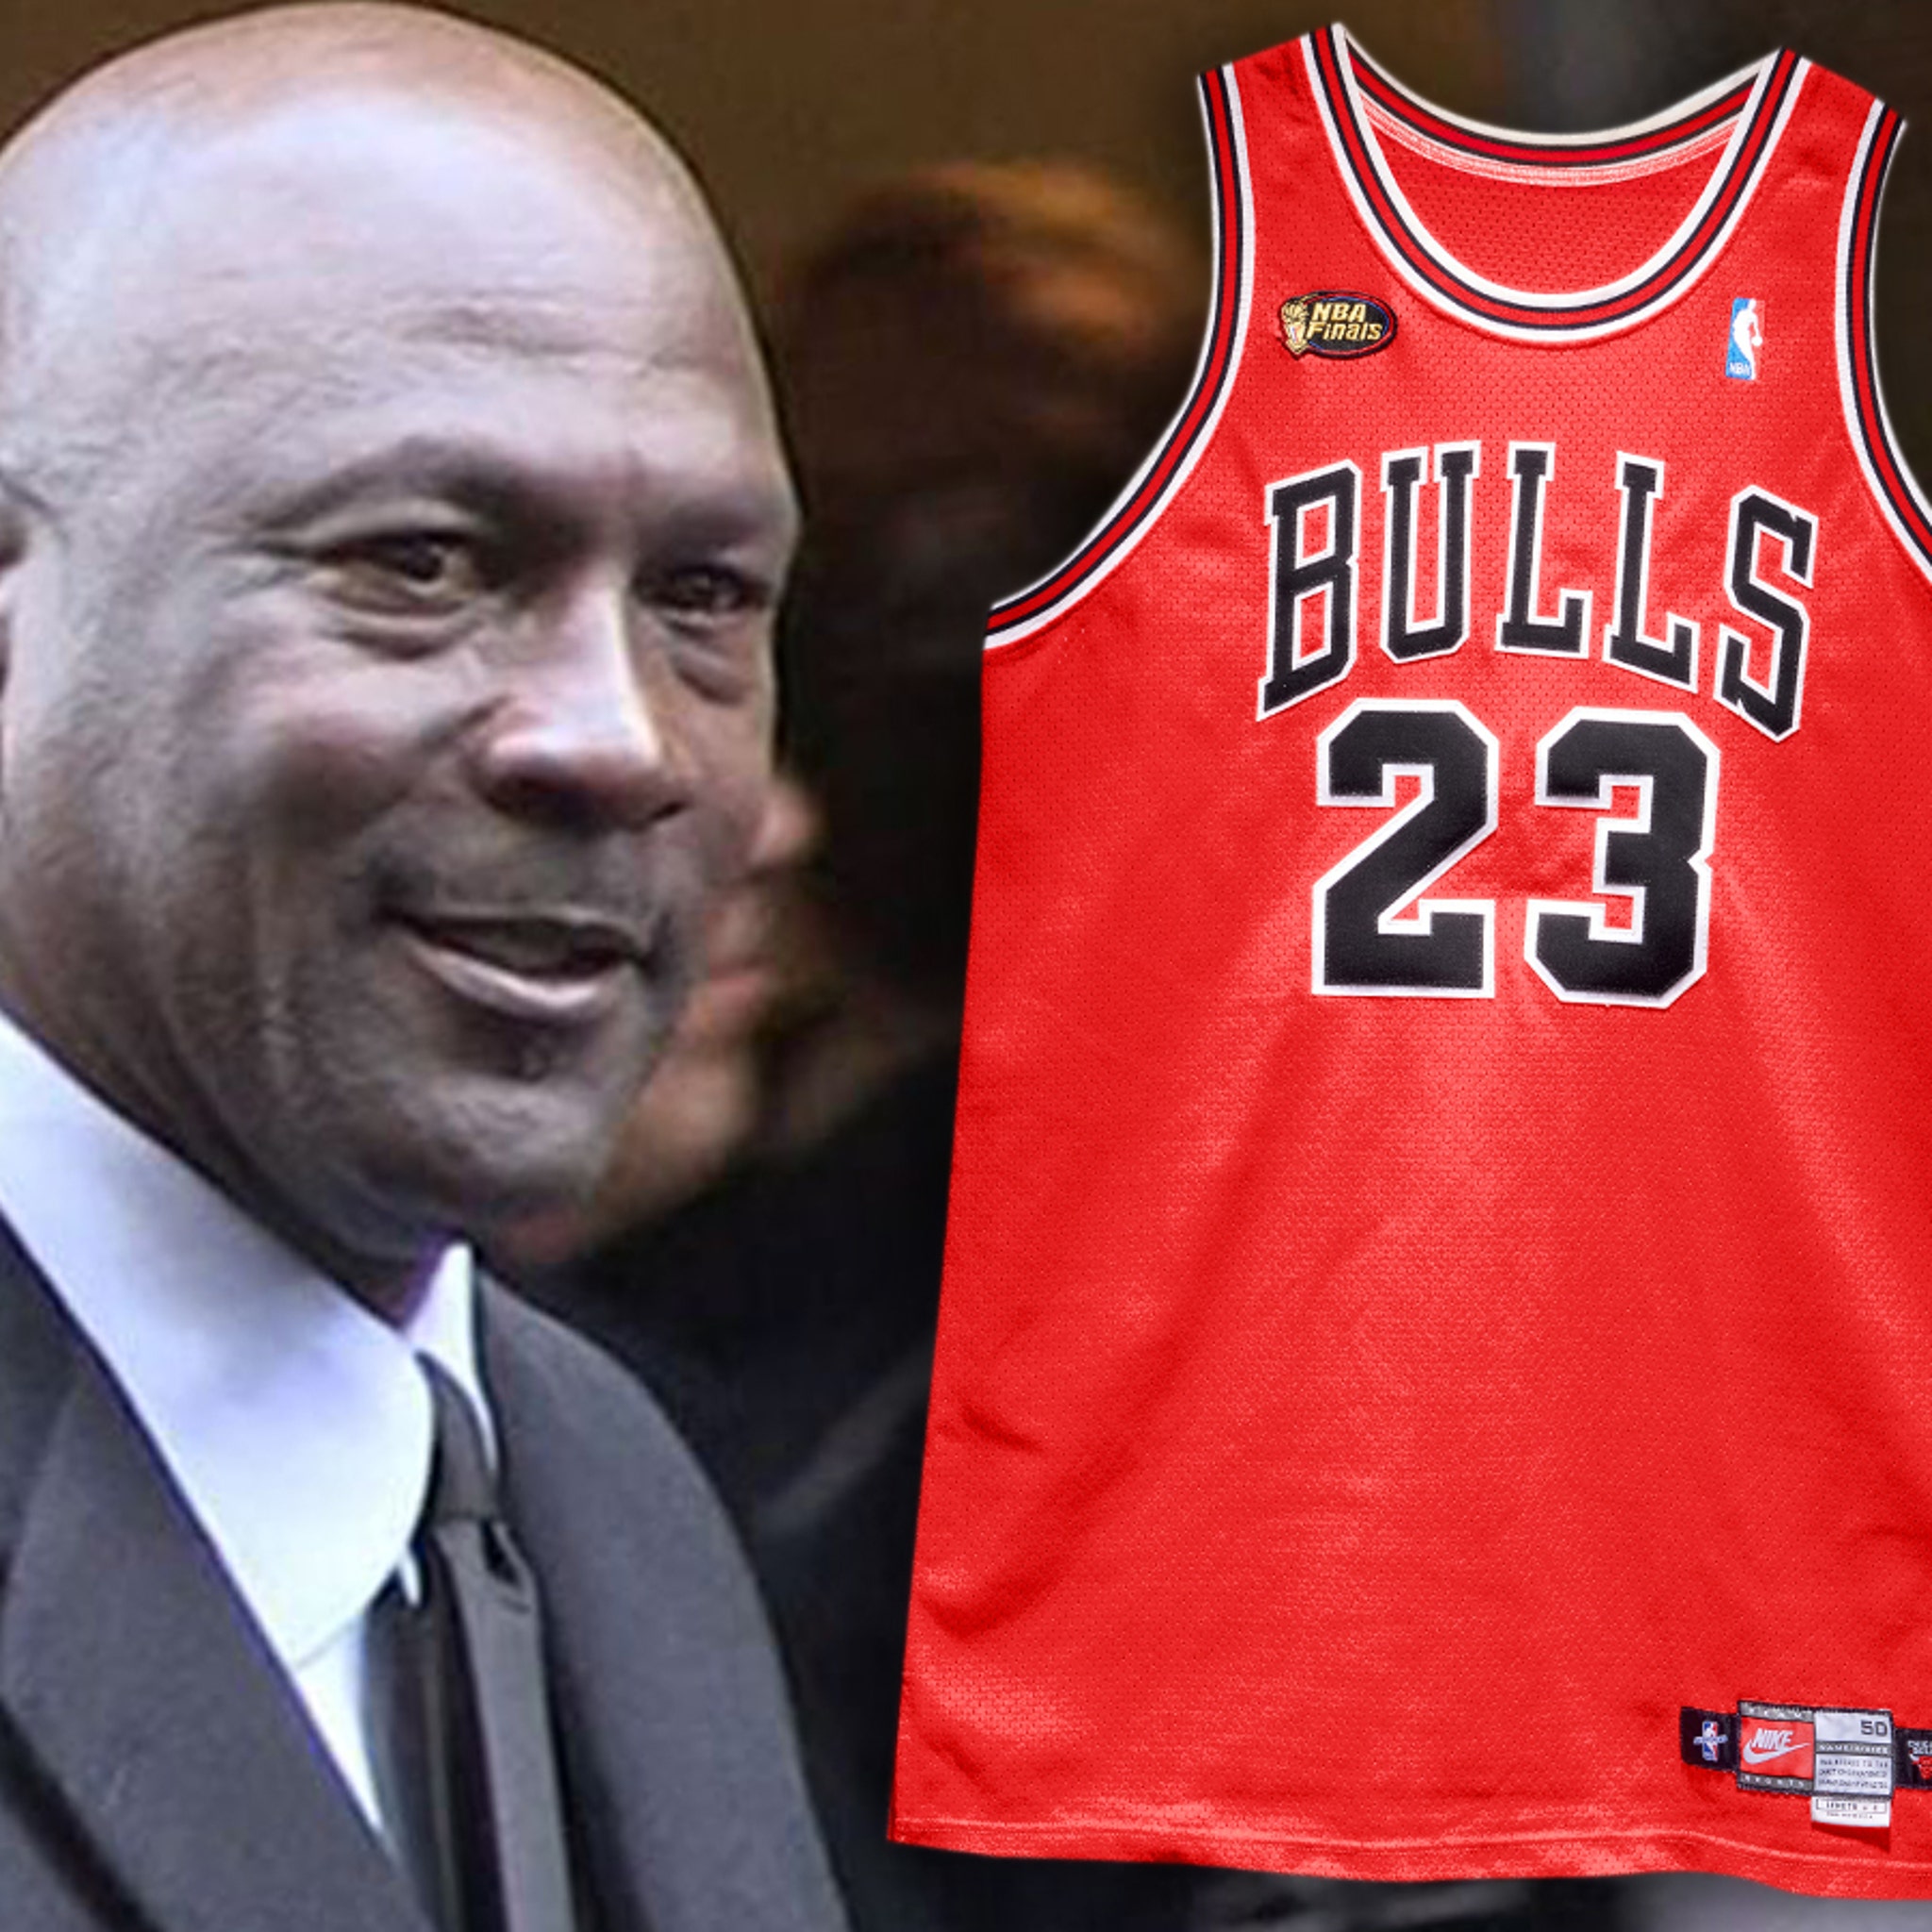 Michael Jordan jersey worn during 1998 NBA finals sold for record $10.1  million at auction - CBS New York